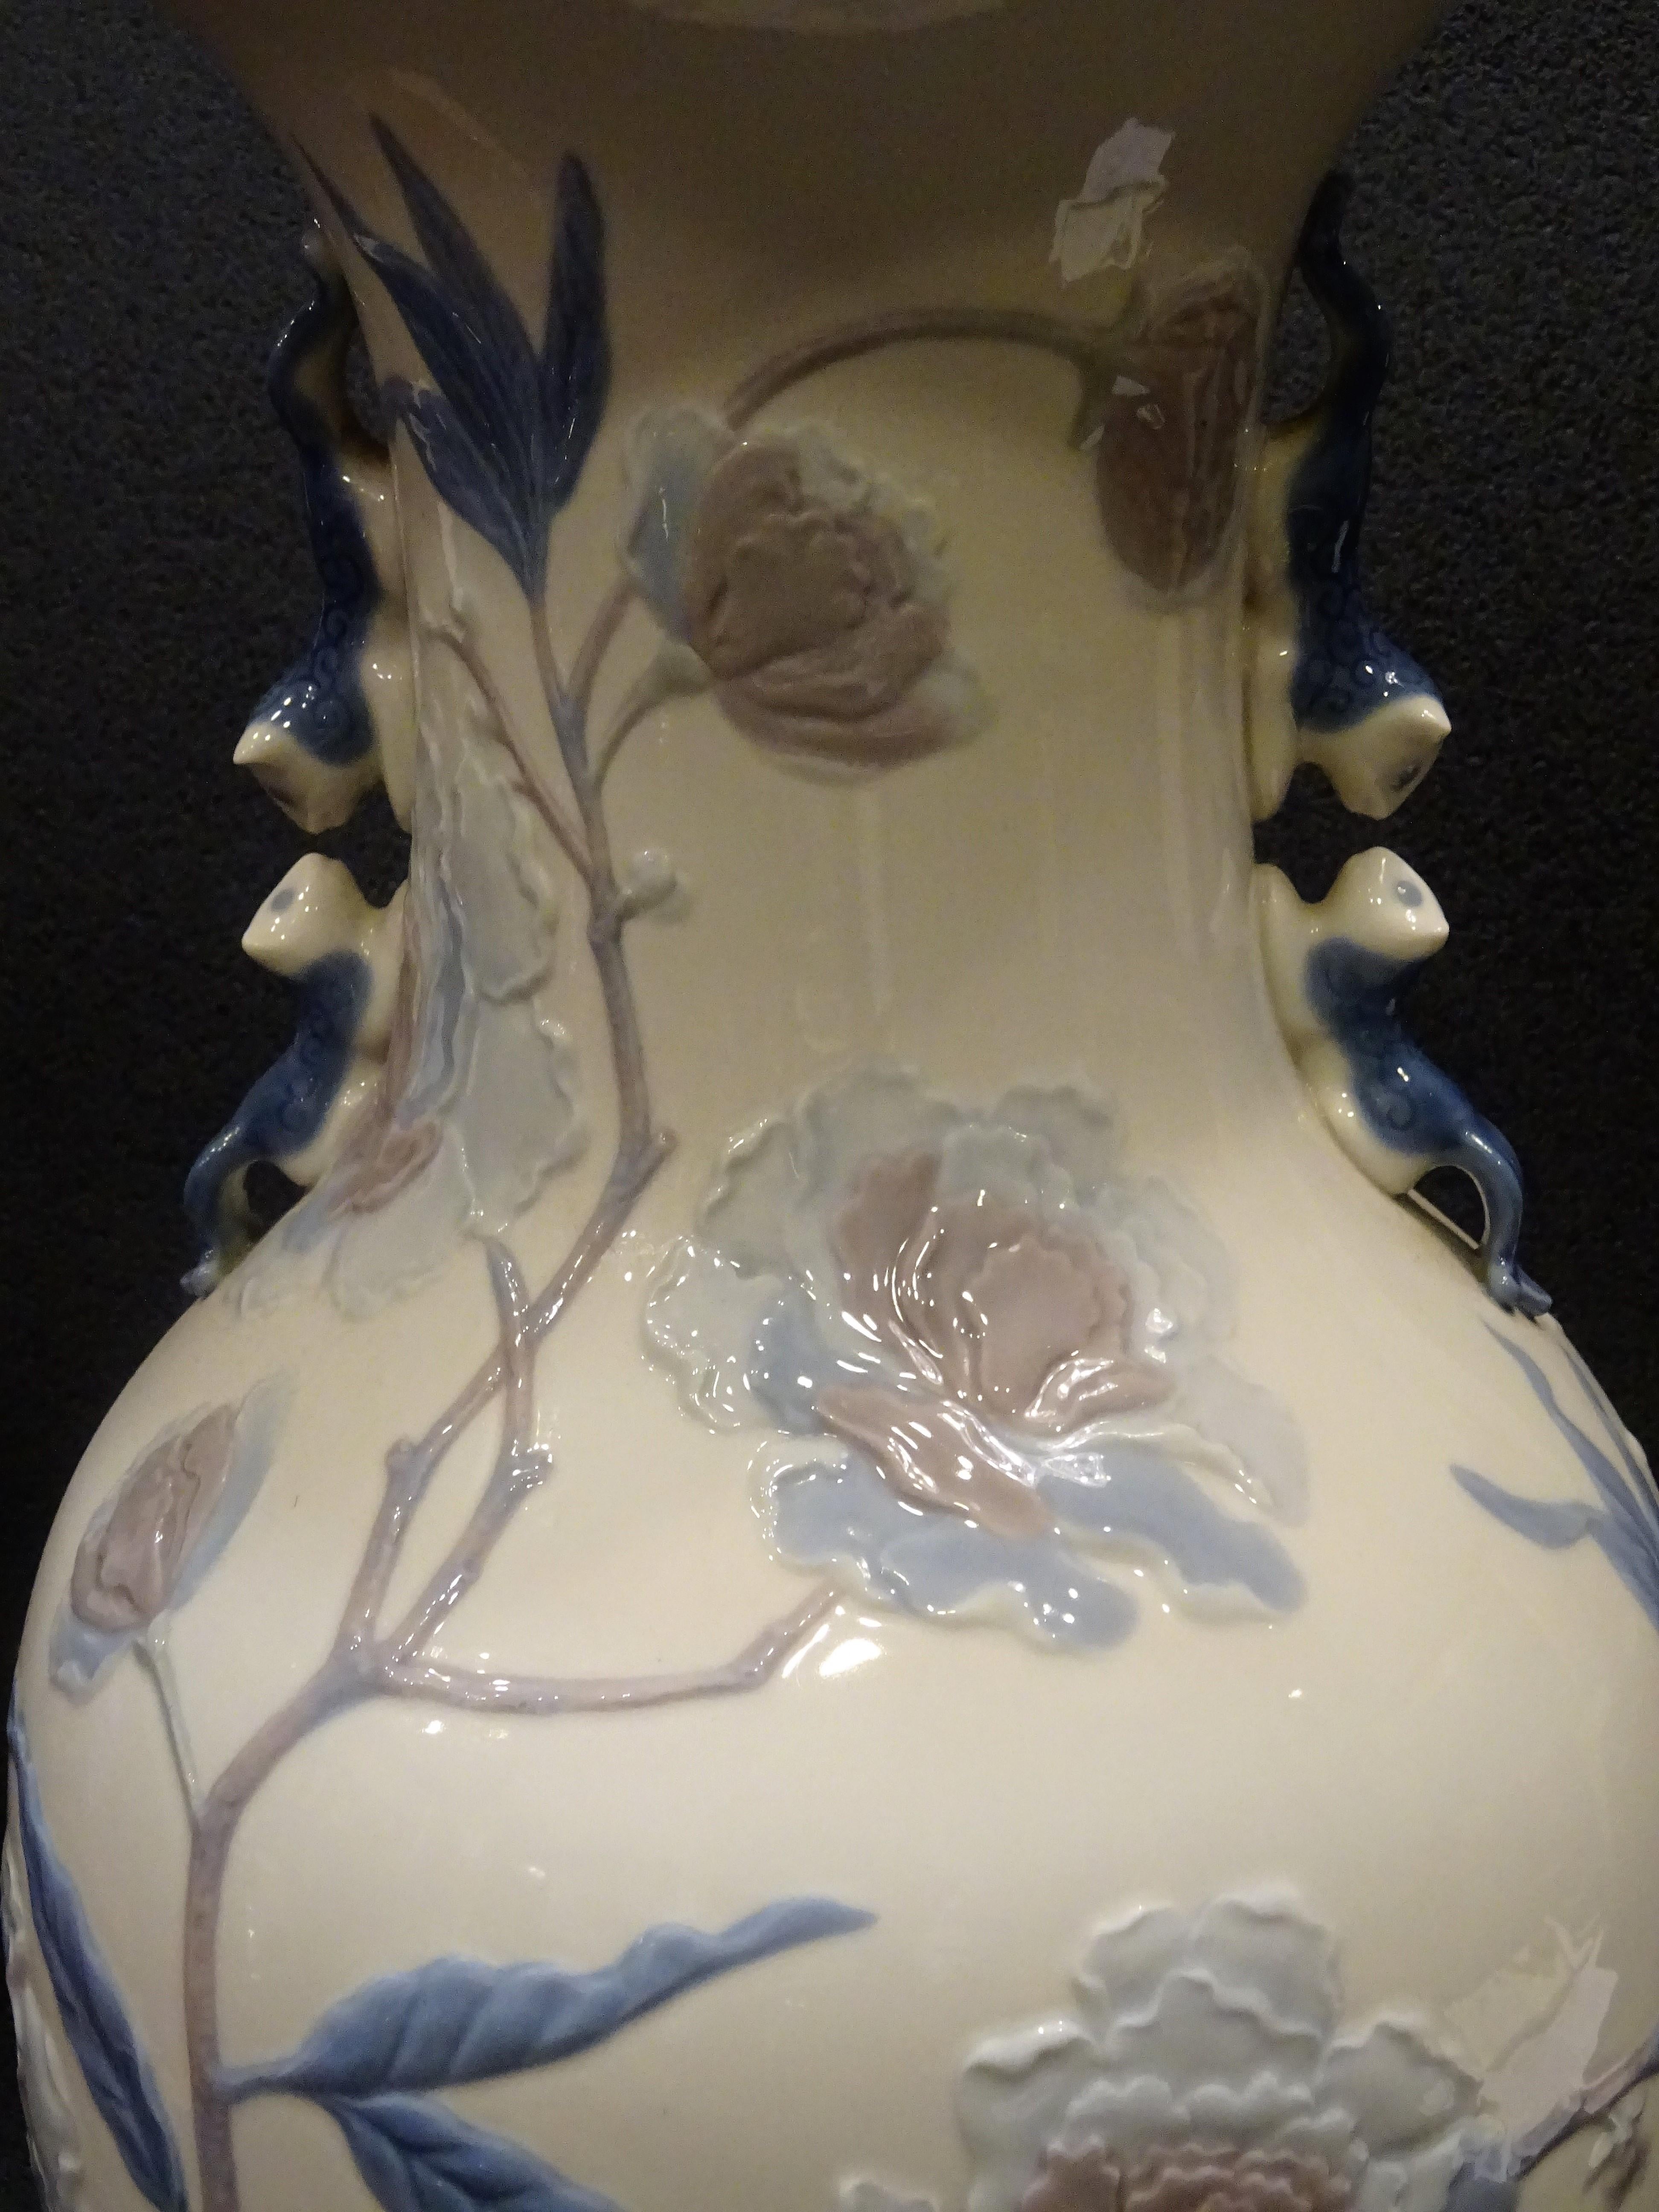 A beautiful and elegant blue and white Lladro porcelain vase, hand painted with flowers and butterflies, handles with foo dog figures.
Marks in the base. In a very good condition with age and use, no cracks, no scratches.
It was purchased in an